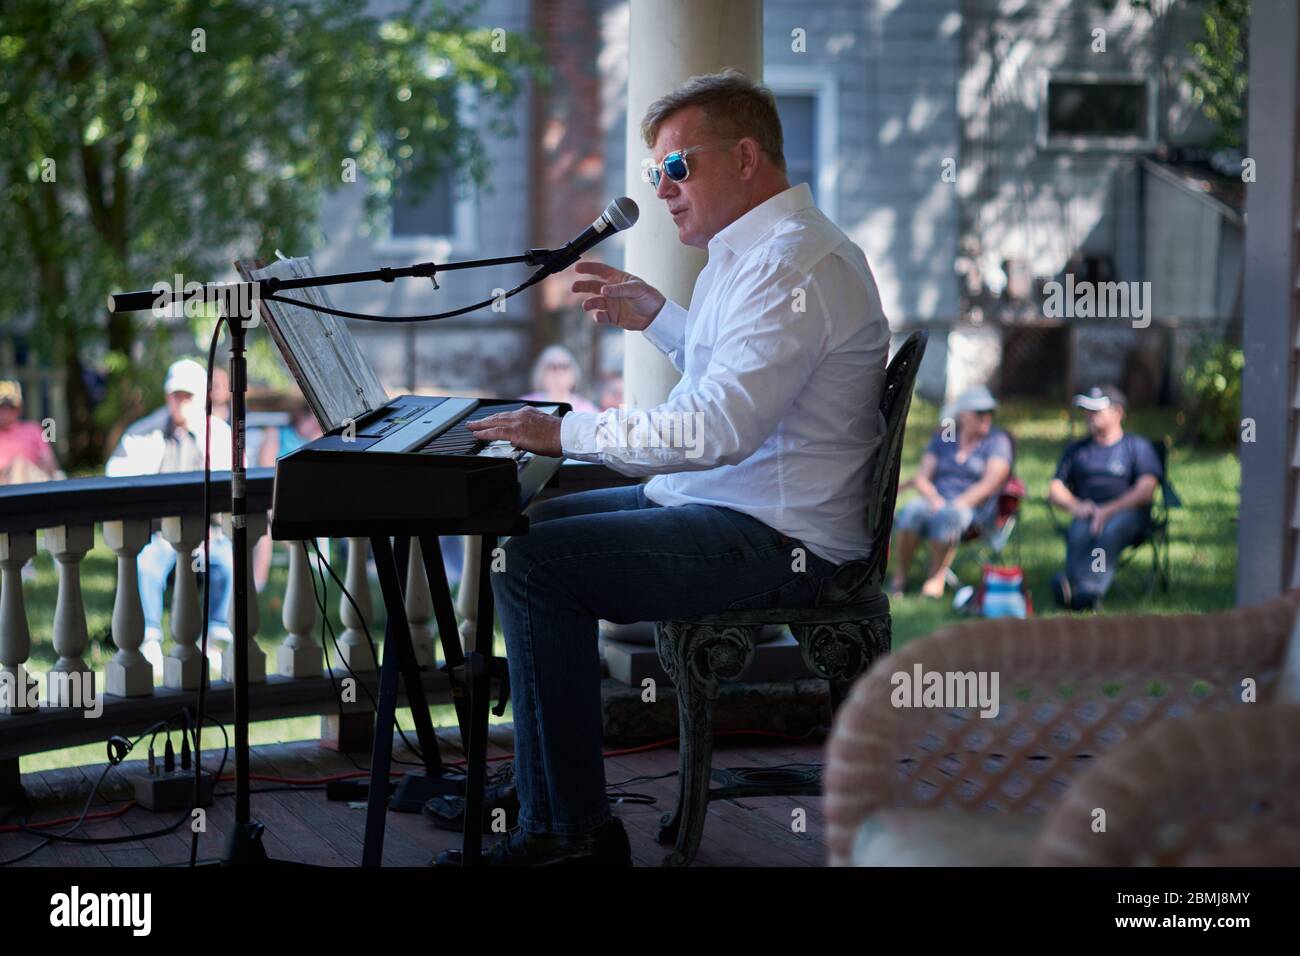 caucasian man wearing white shirt playing an electric keyboard to a crowd outdoors at a Summer porch concert in a historic residential neighborhood Stock Photo